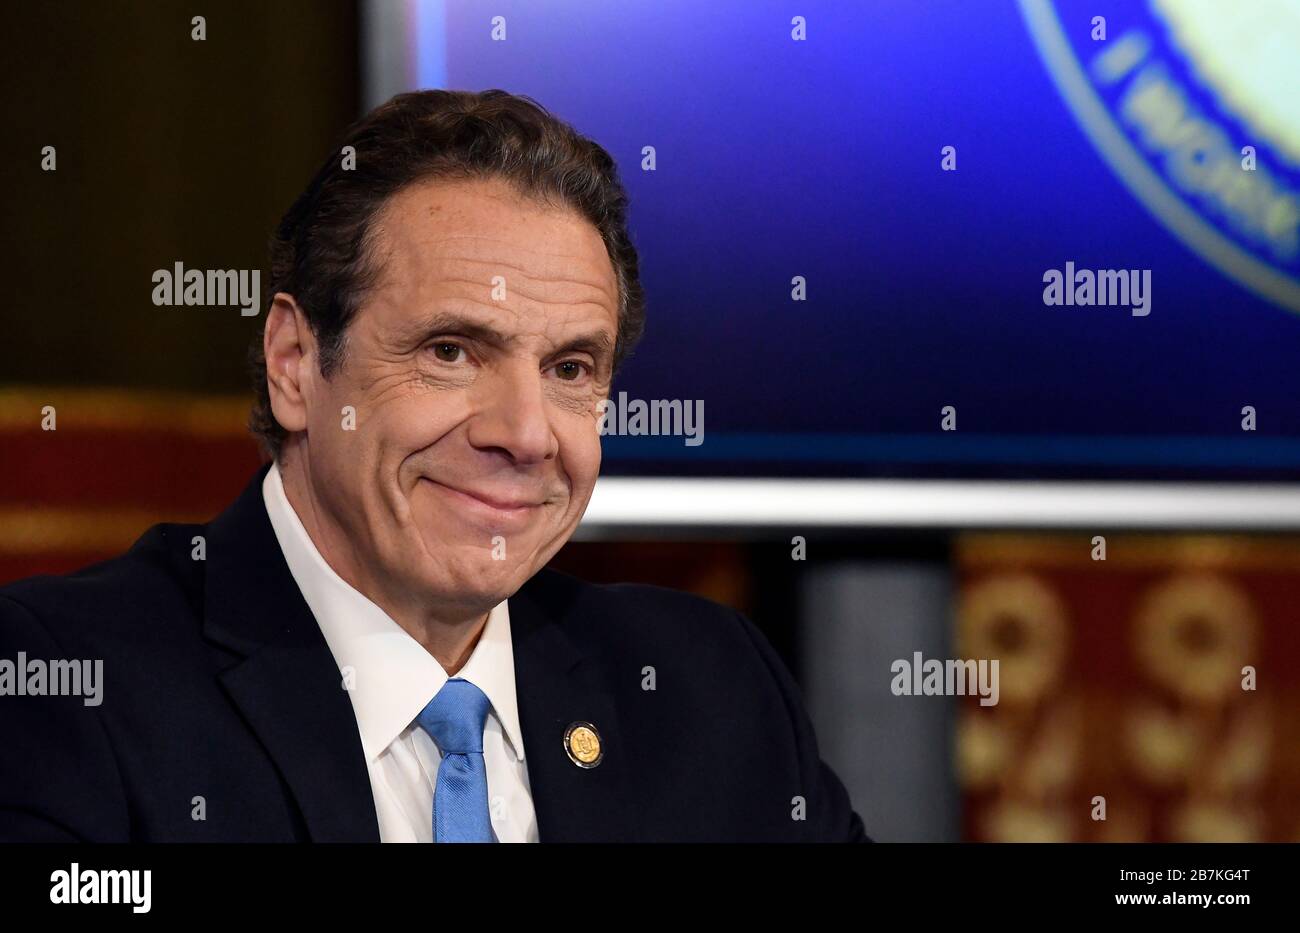 Albany,New York / United States 3/16/20 New York Gov. Andrew Cuomo gives an update on the Coronavirus during a news conference at the state Capitol. Stock Photo